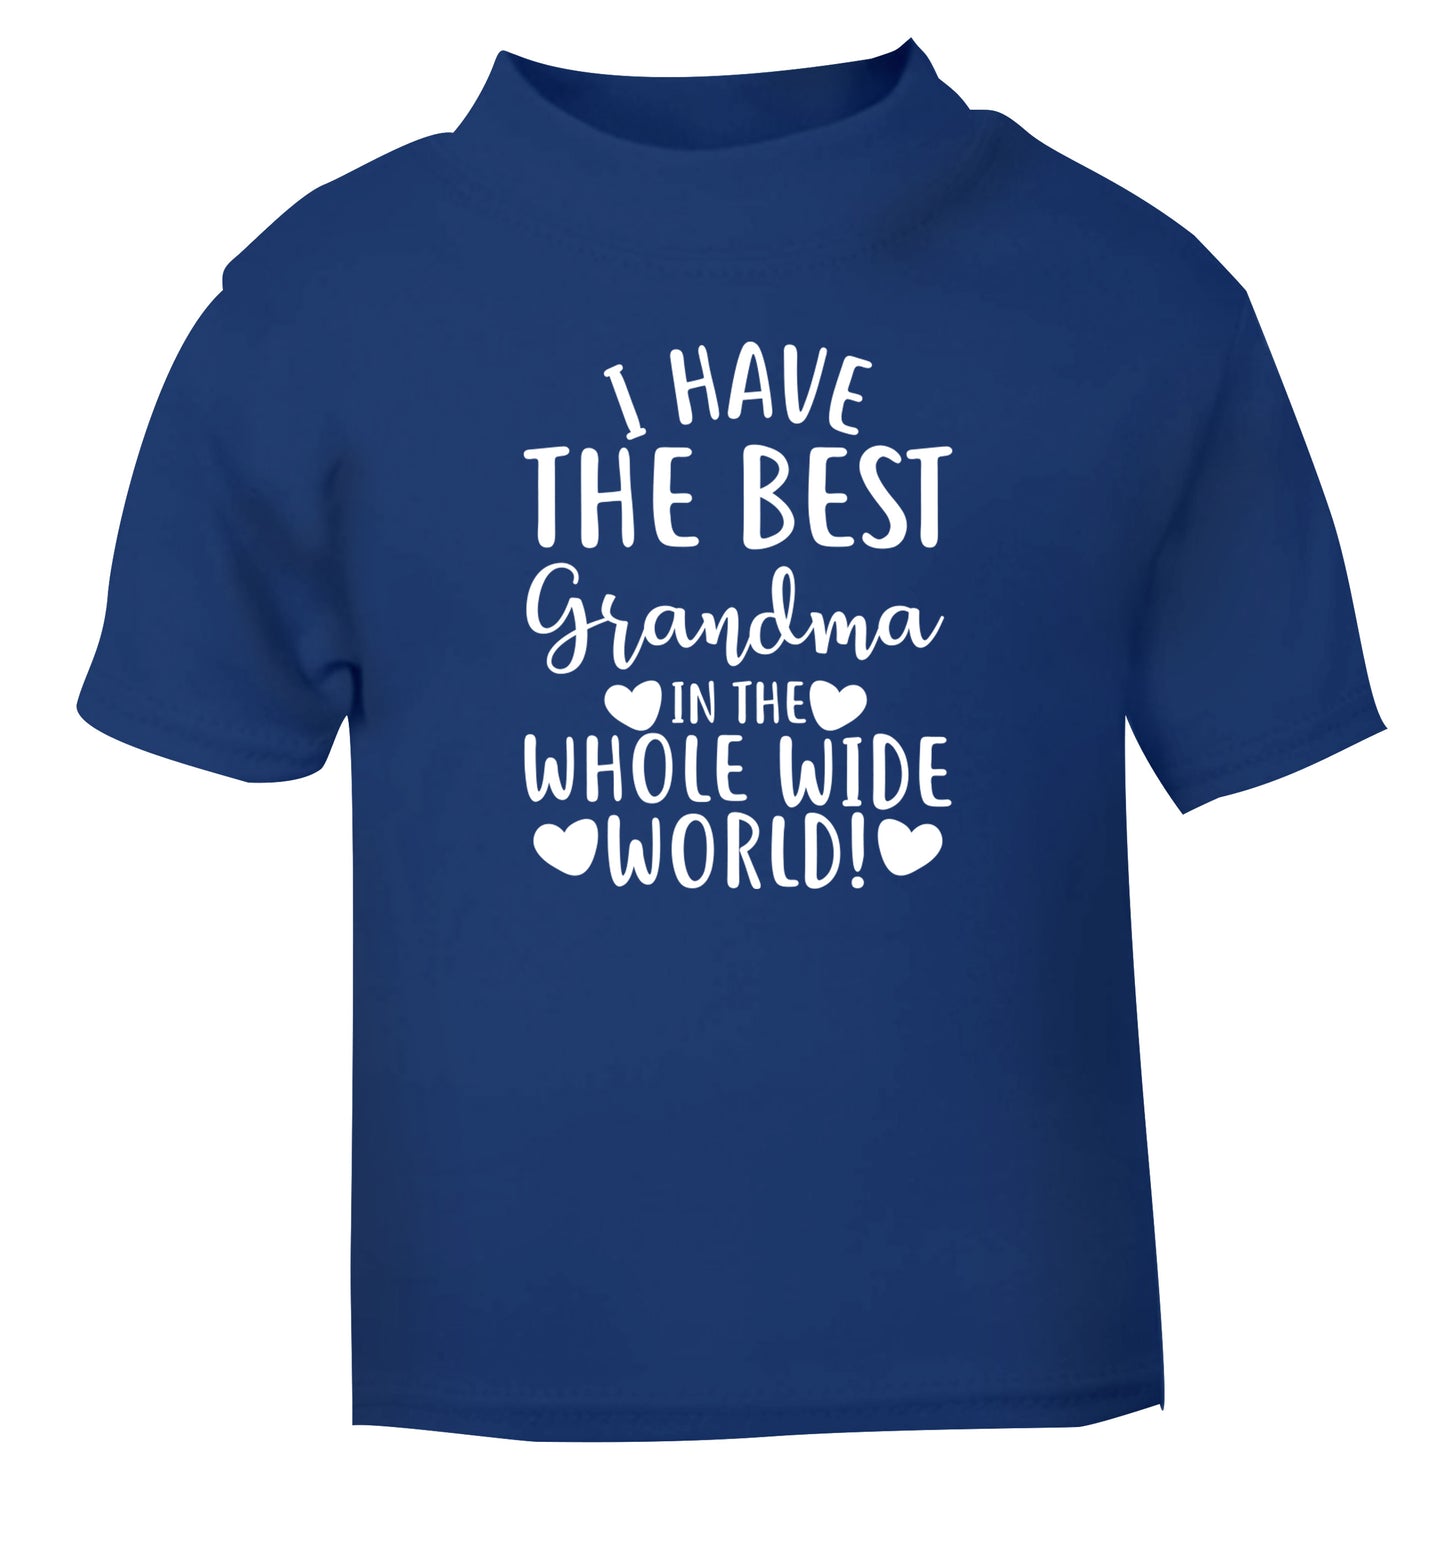 I have the best grandma in the whole wide world! blue Baby Toddler Tshirt 2 Years